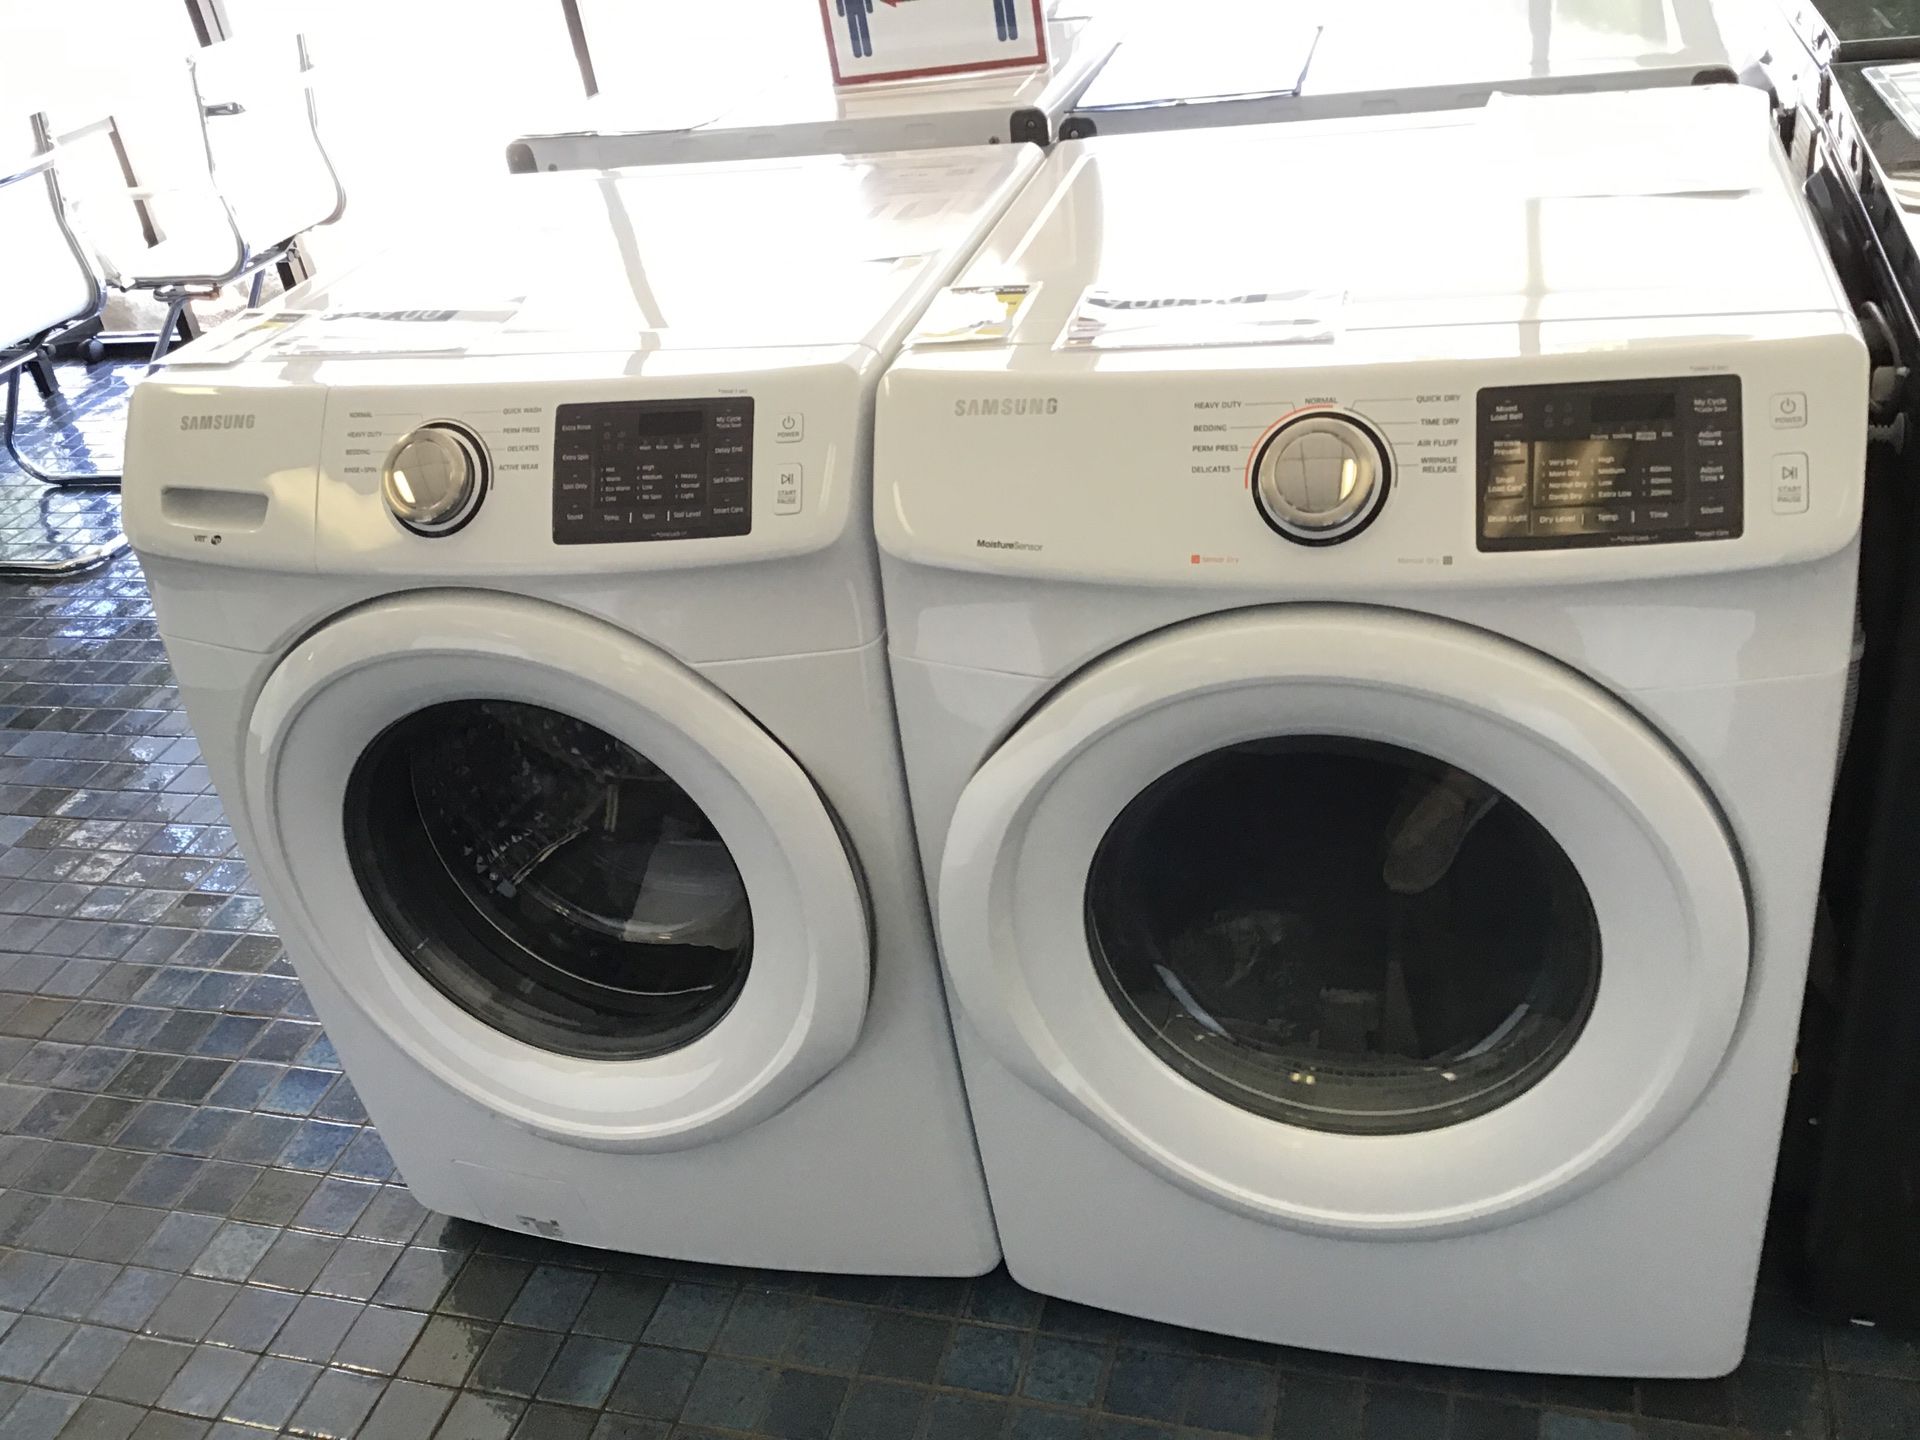 Samsung Front load washer and gas dryer in white